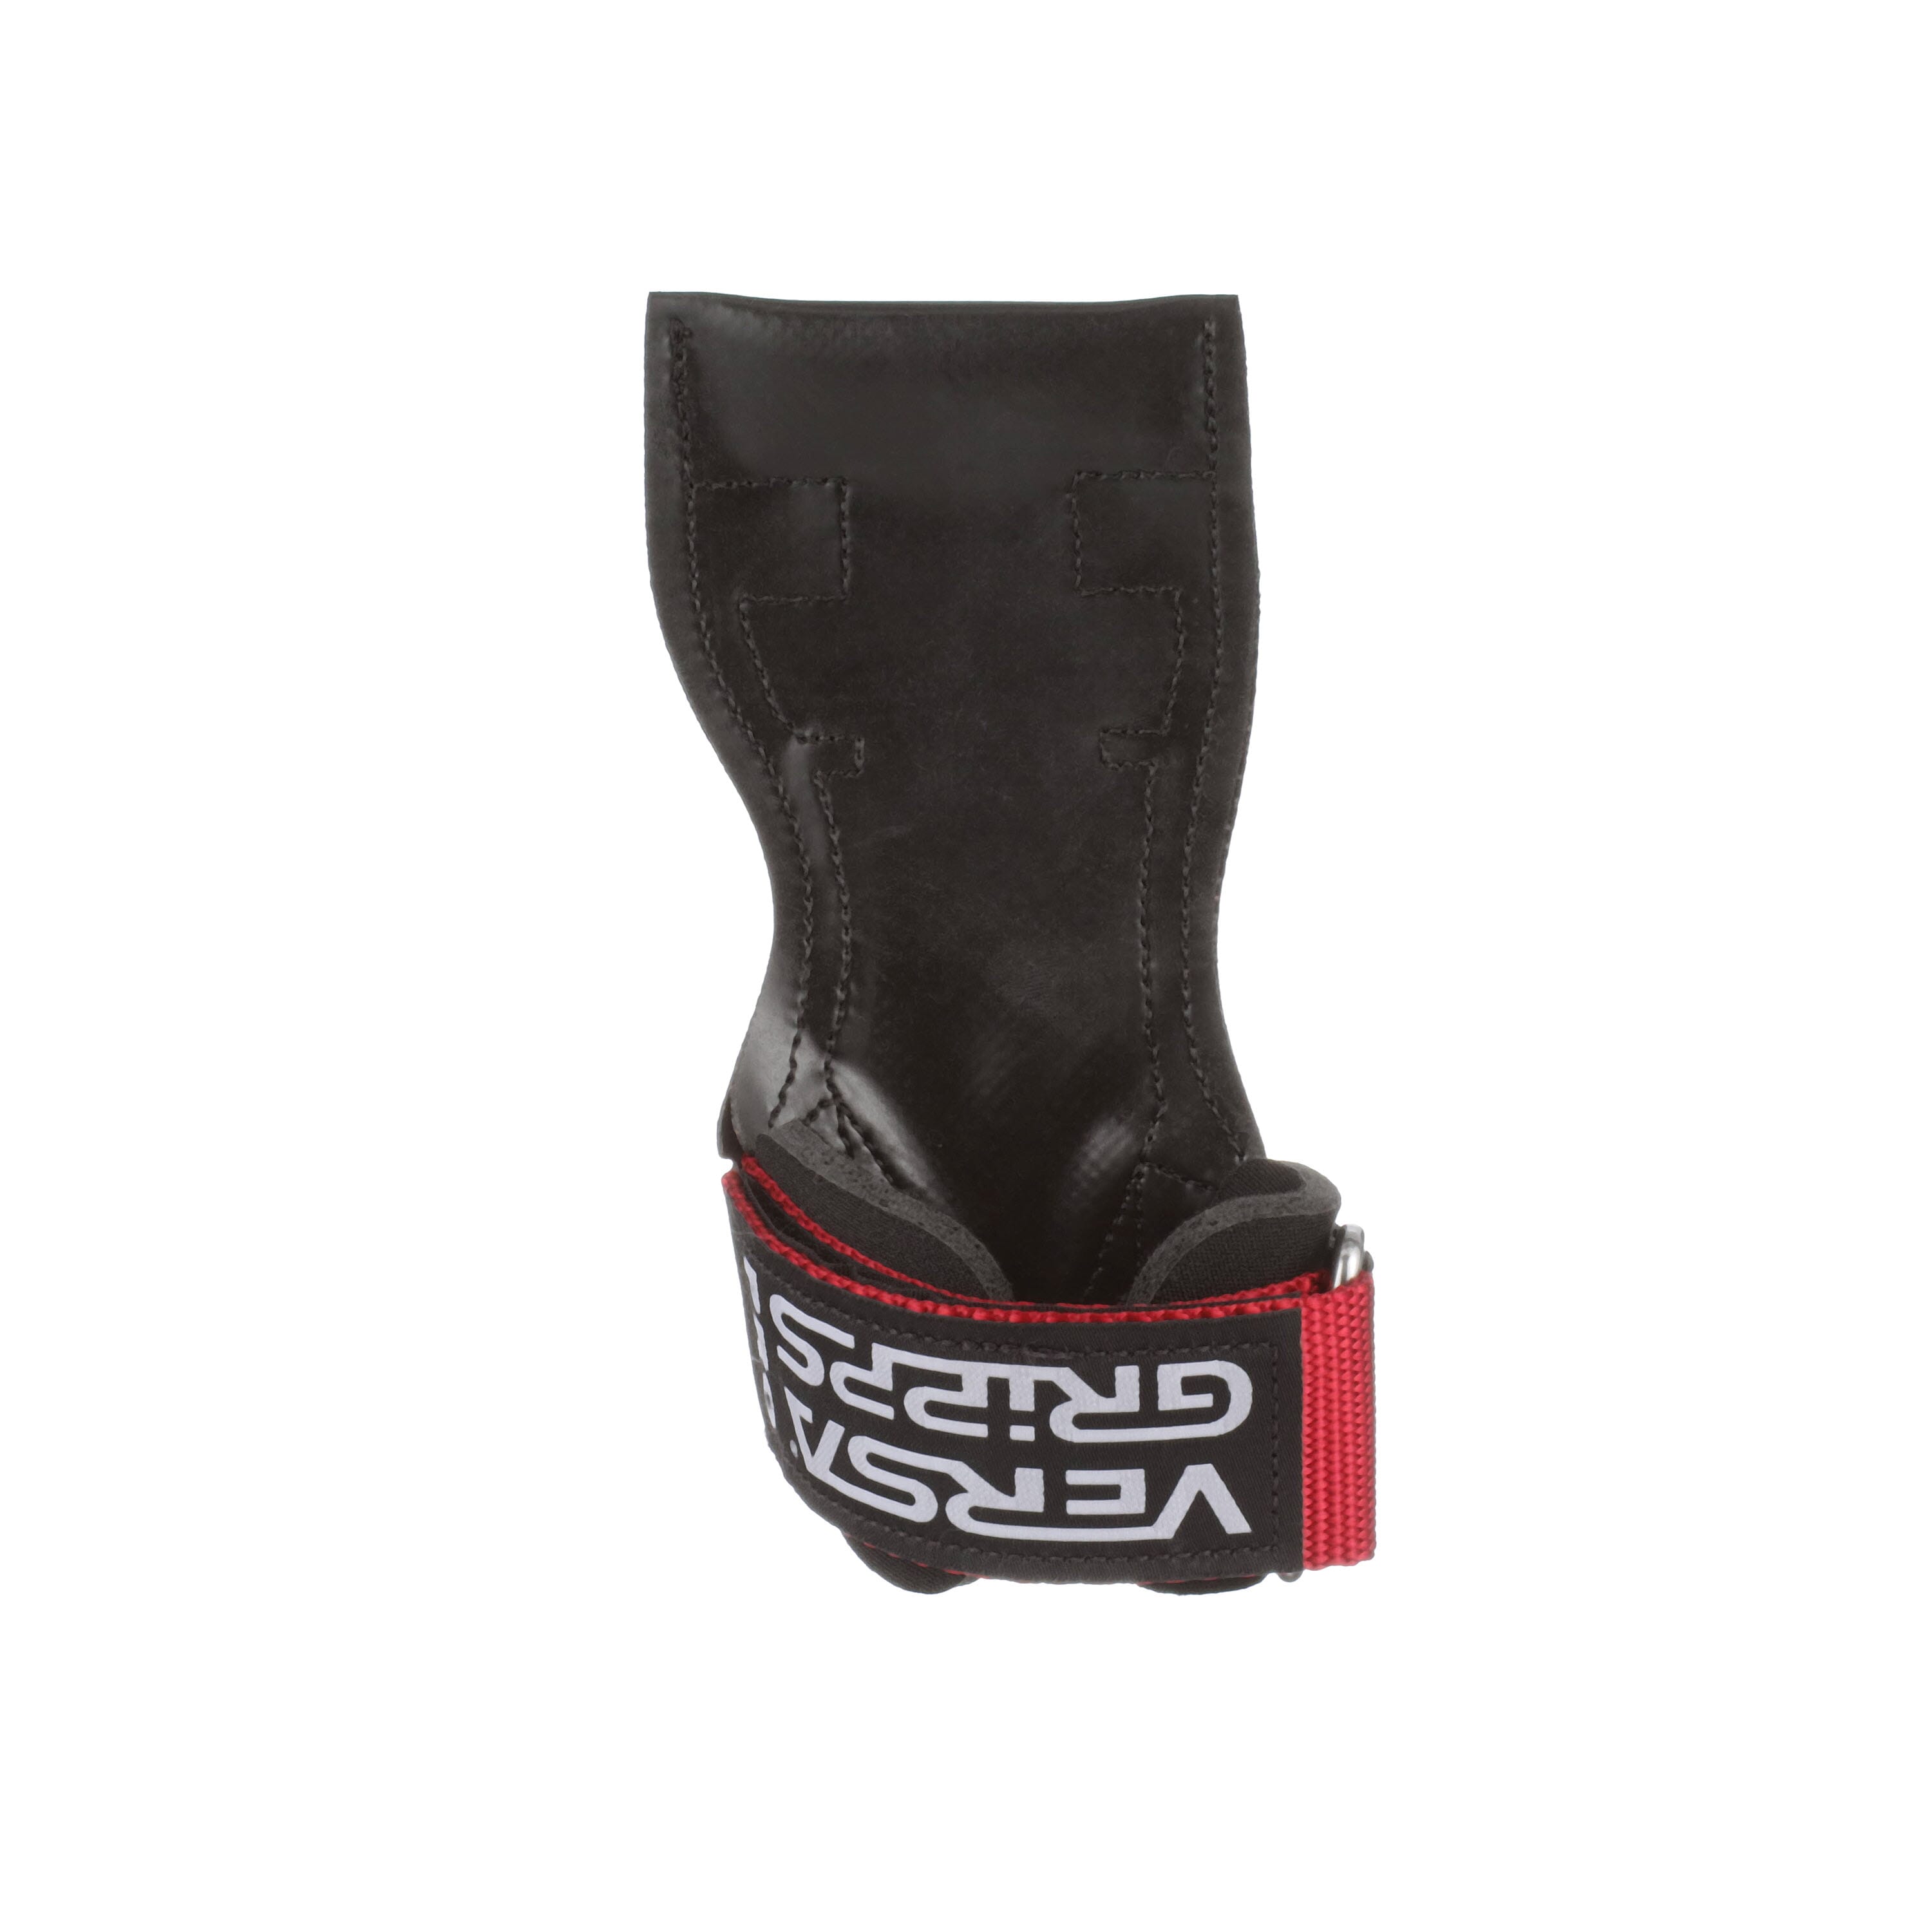 The Best Training Accessory in The World Made in The USA Versa Gripps® PRO Authentic 